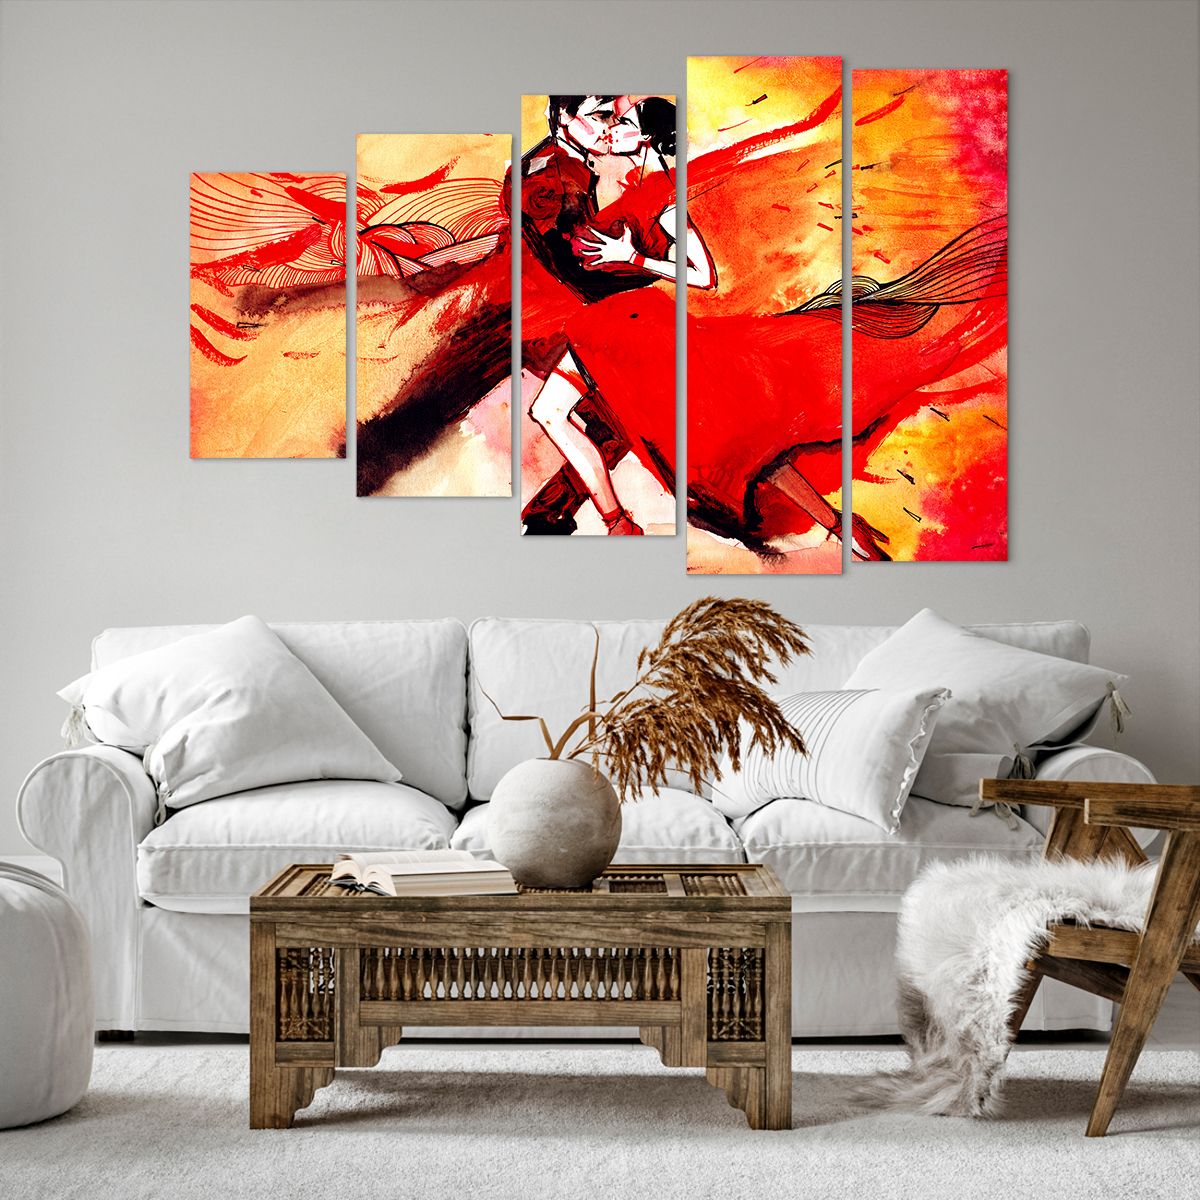 Impression sur toile Abstraction, Impression sur toile Danse, Impression sur toile Tango, Impression sur toile Danseurs, Impression sur toile Art